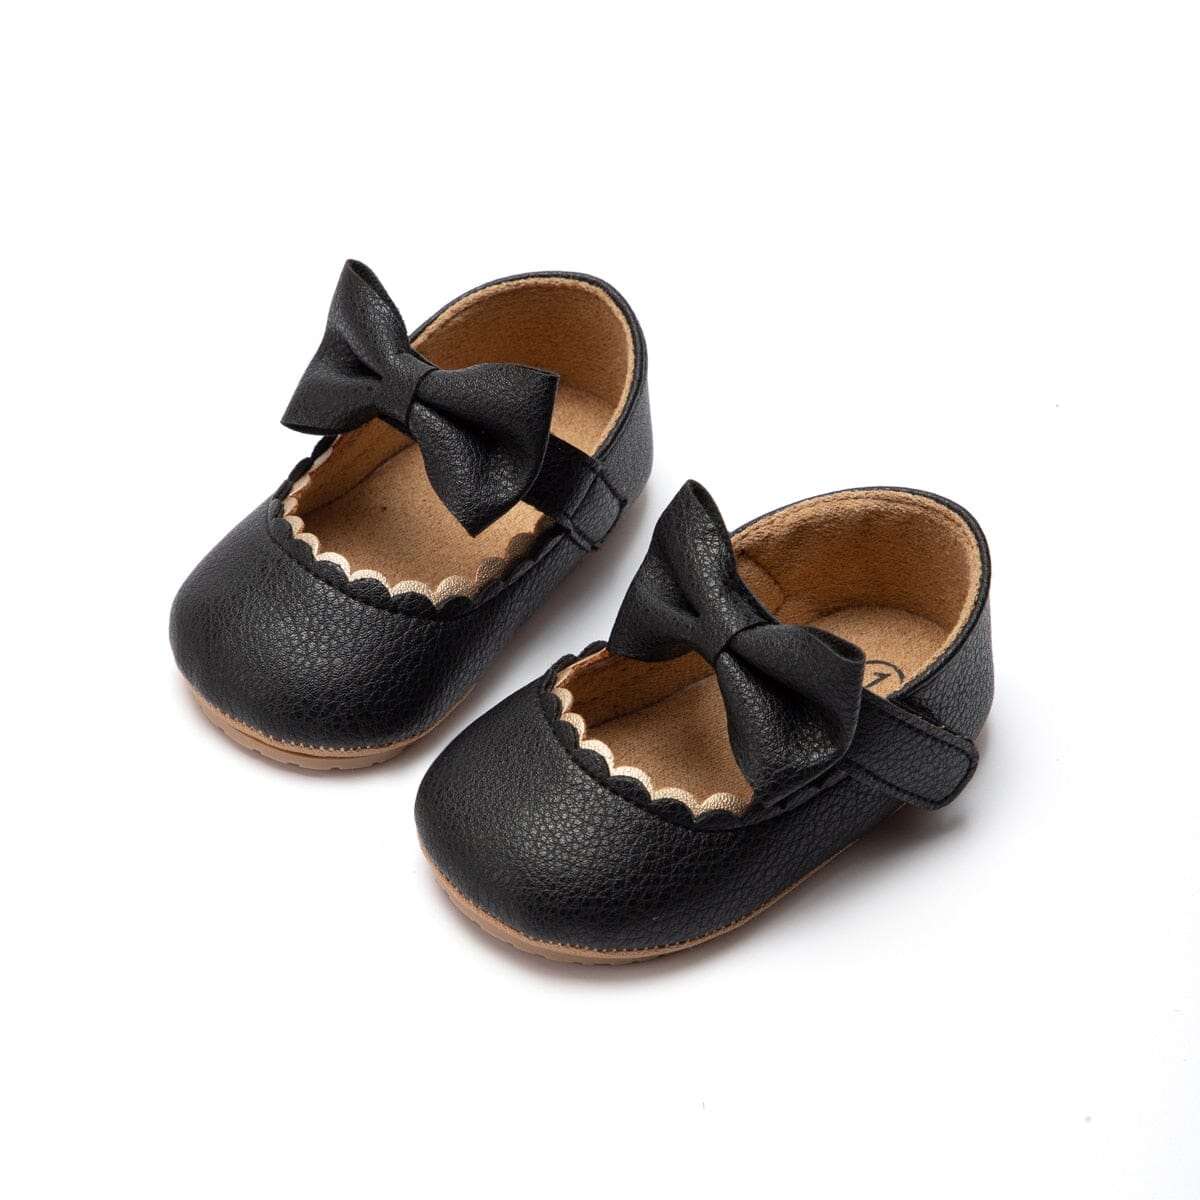 KIDSUN Baby Casual Shoes Infant Toddler Bowknot Non-slip Rubber Soft-Sole Flat PU First Walker Newborn Bow Decor Mary Janes Hilo shop Black 0-6 Months 